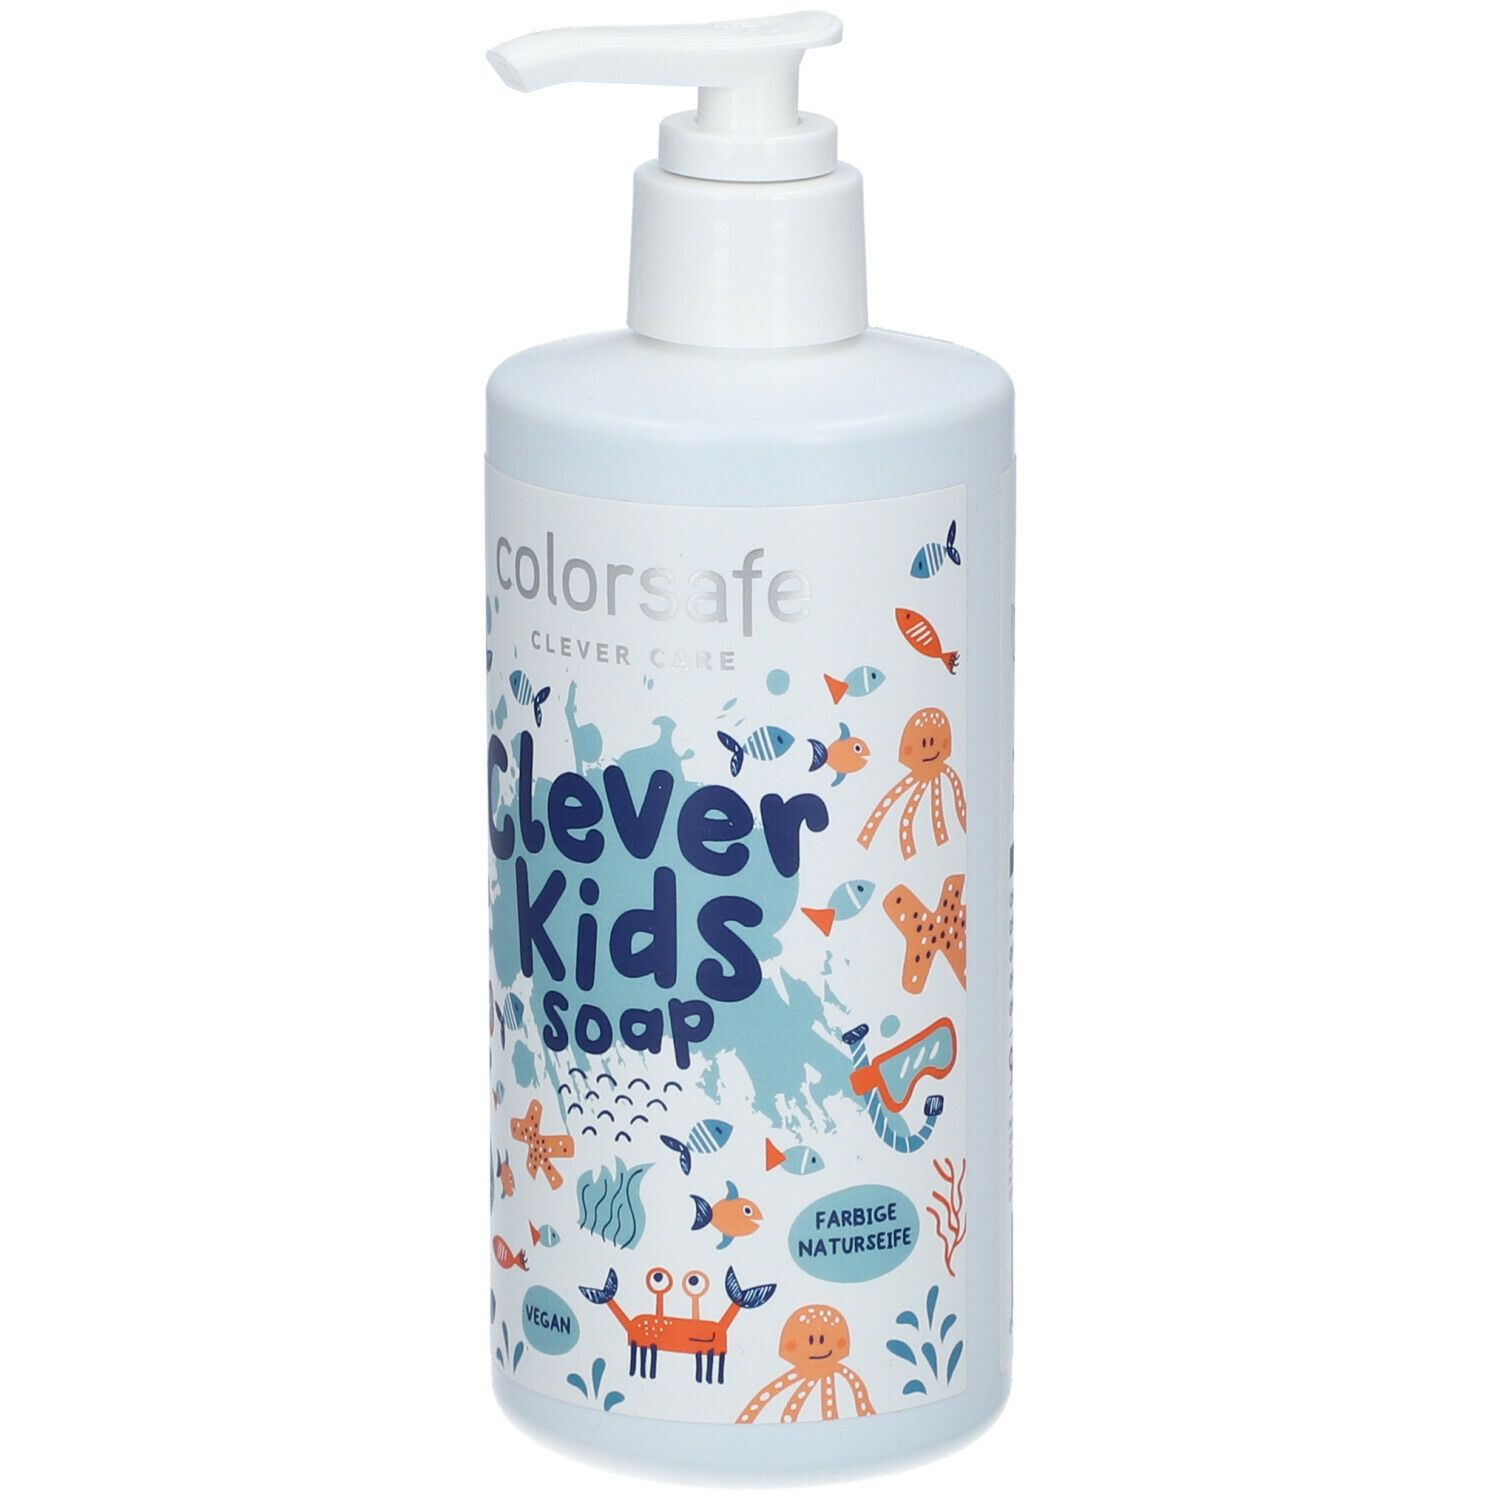 colorsafe CLEVER CARE DIE BLAUE clevere Kinderseife